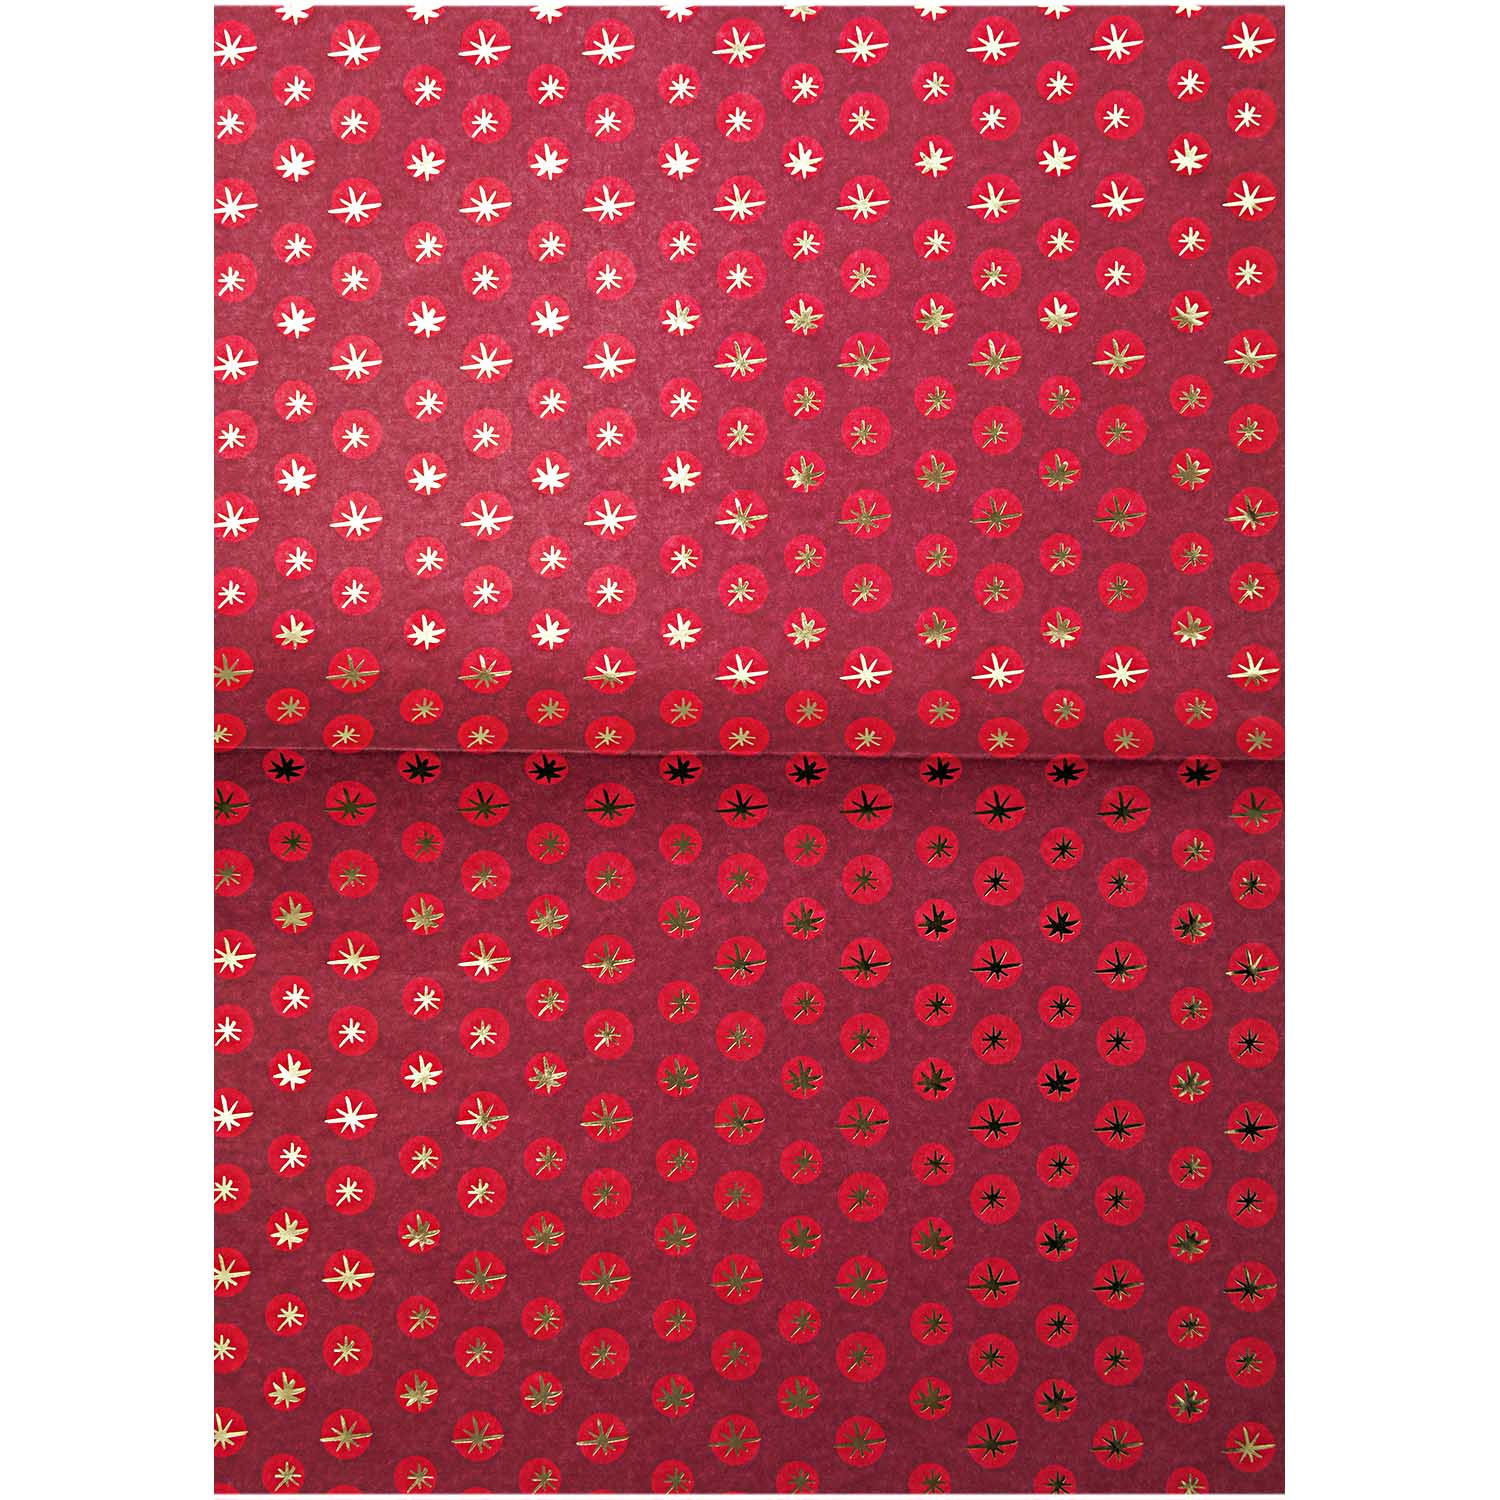 Paper Patch Foiled Decoupage Paper Sheet - Jolly Christmas: Red Stars